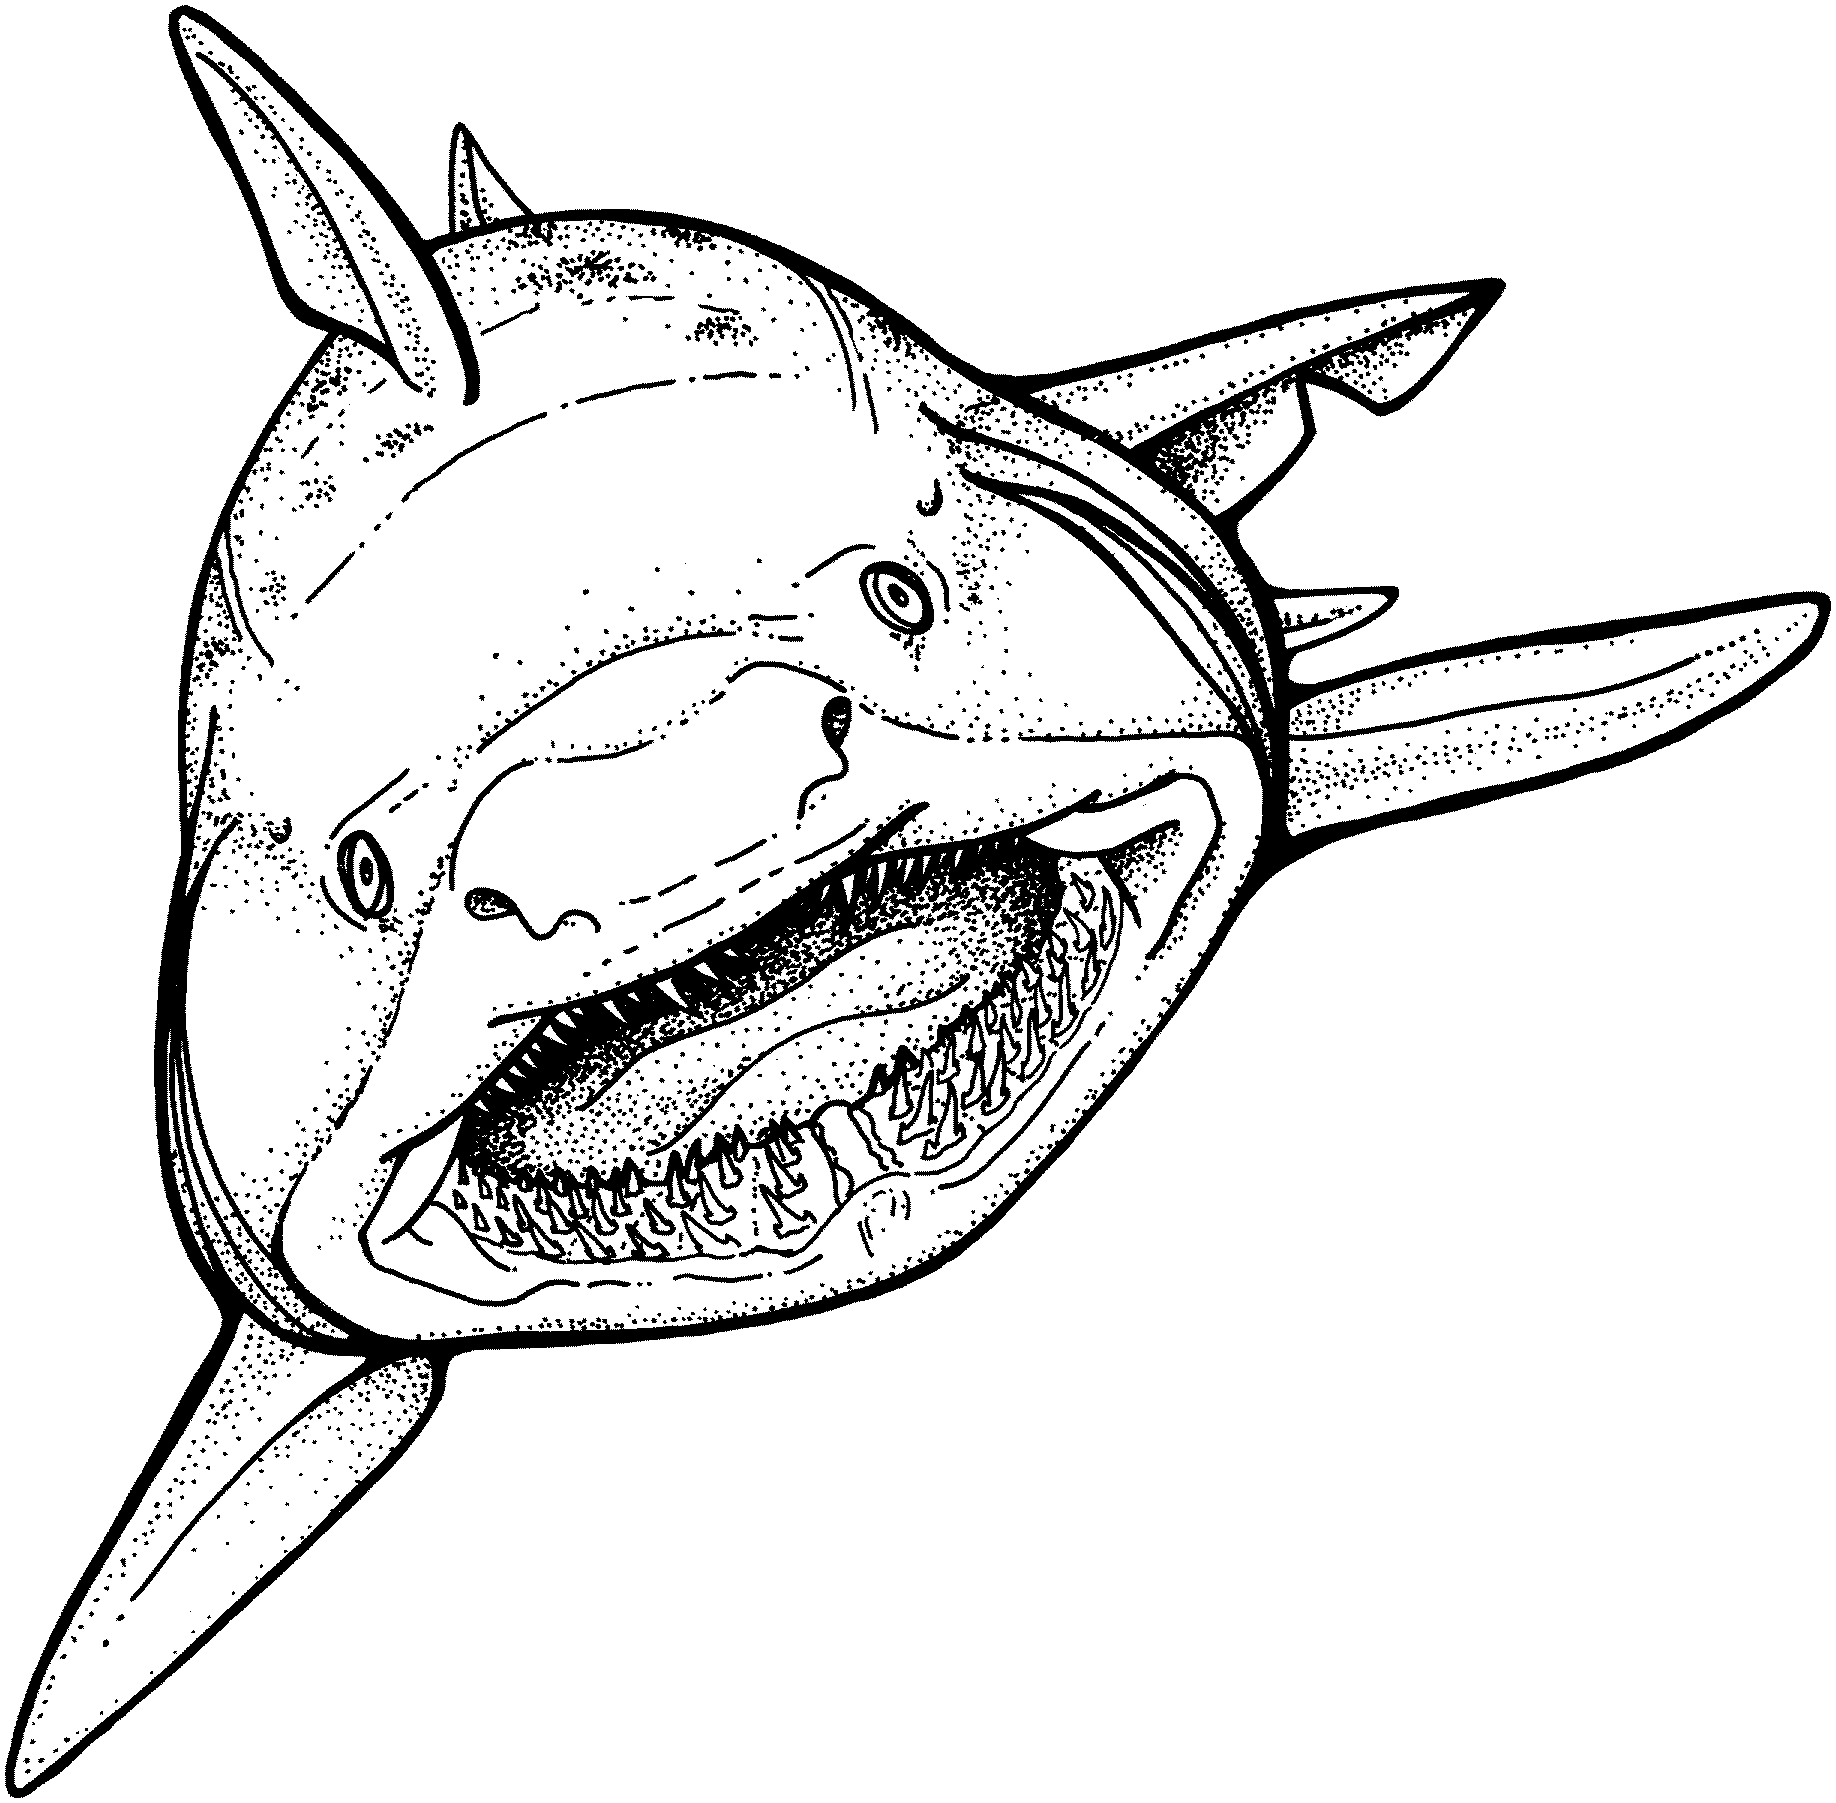 drawing-shark-14837-animals-printable-coloring-pages